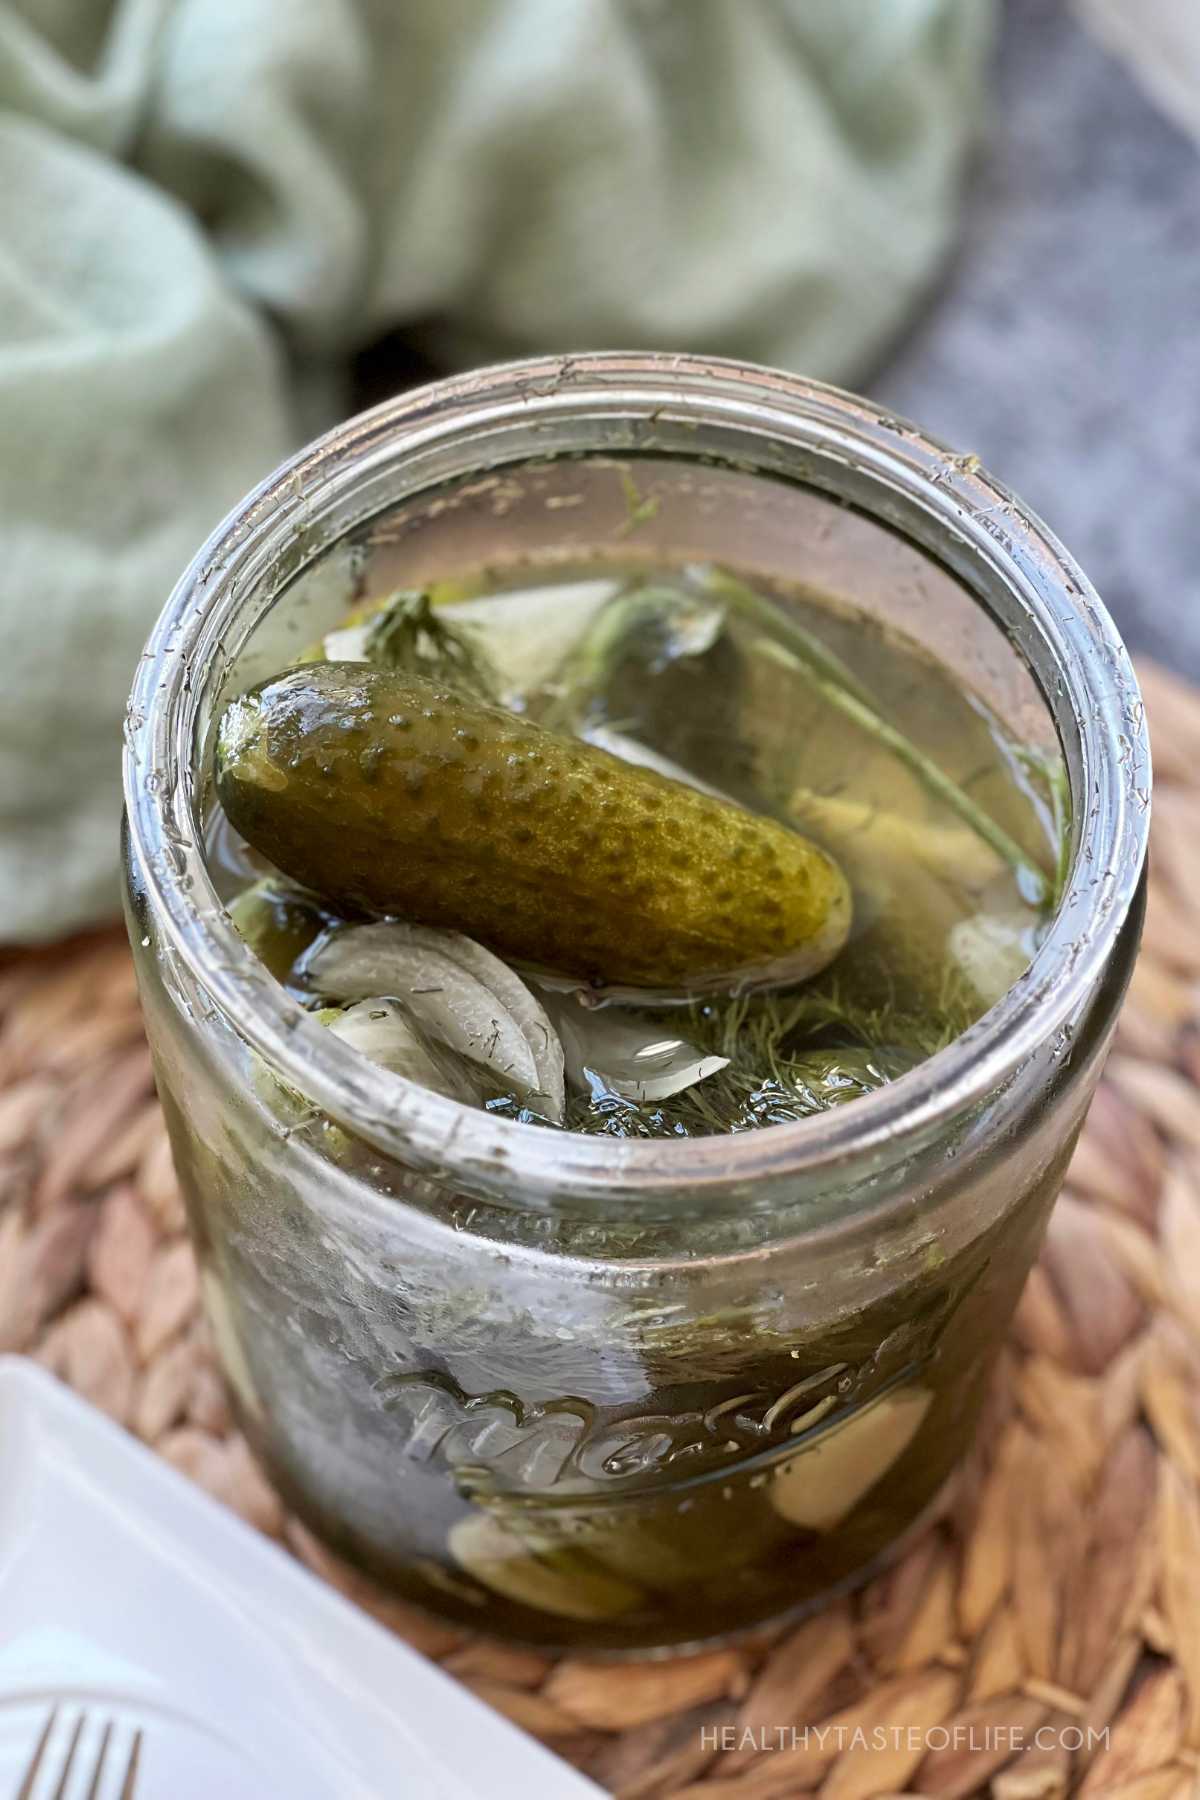 Lacto fermented cucumbers pickled in salt brine without vinegar